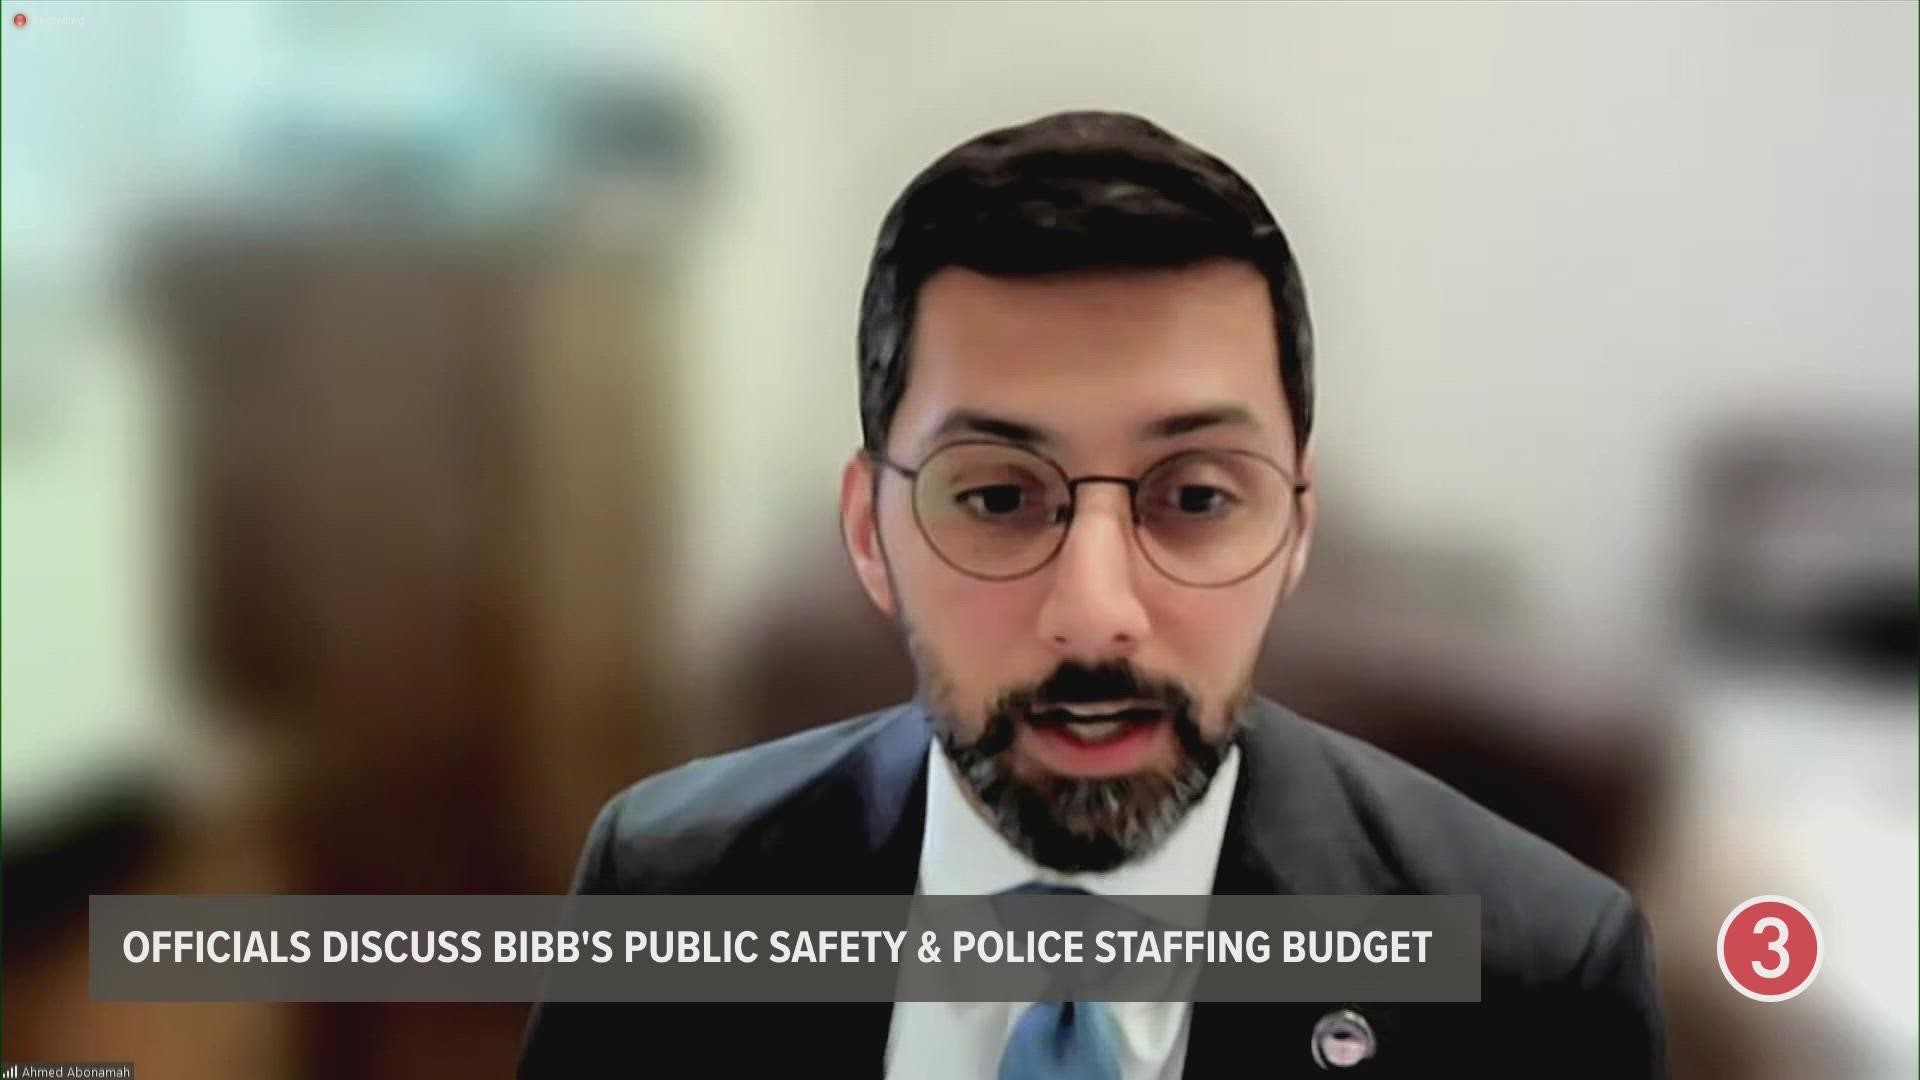 City of Cleveland officials held a press conference on Friday to discuss the mayor's estimated budget for public safety and police staffing.